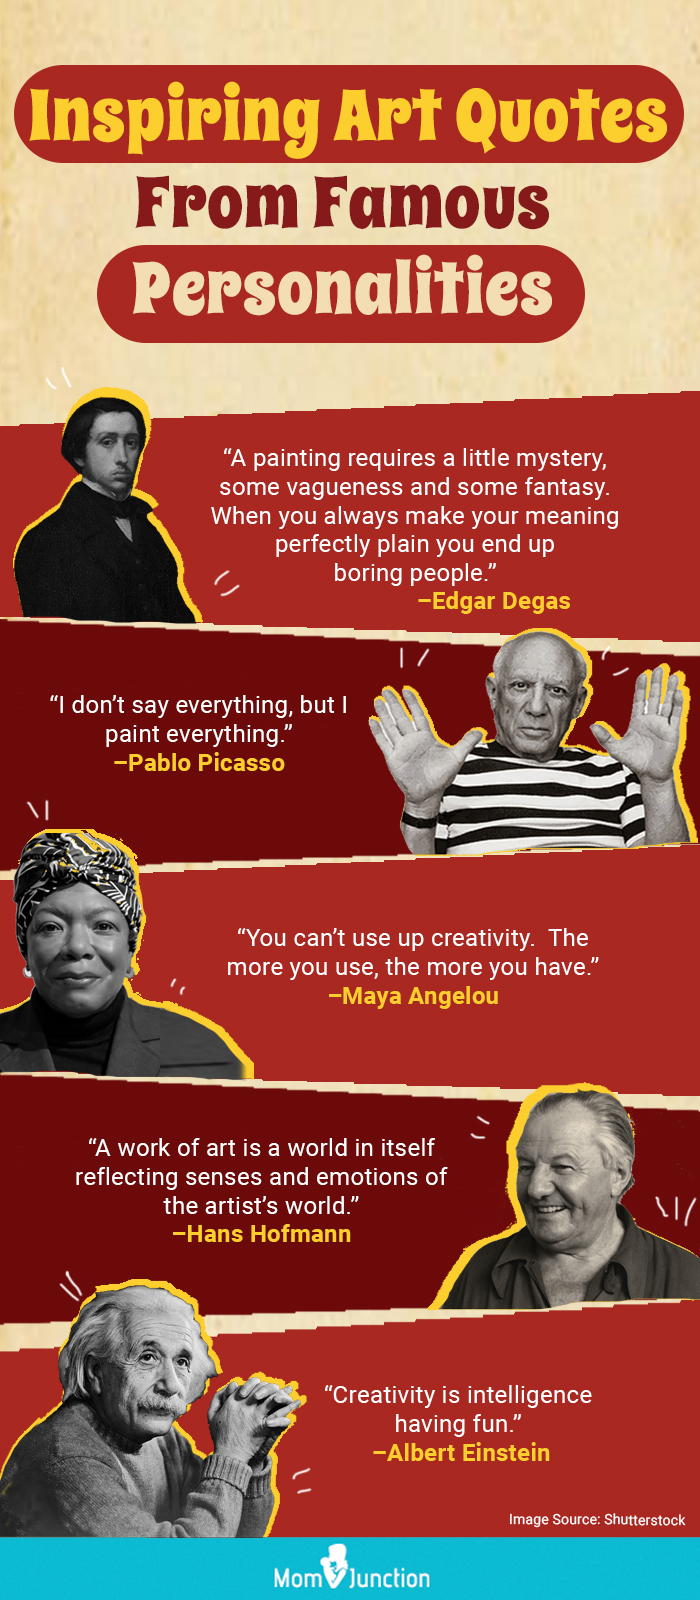 Inspiring Art Quotes From Famous Personalities